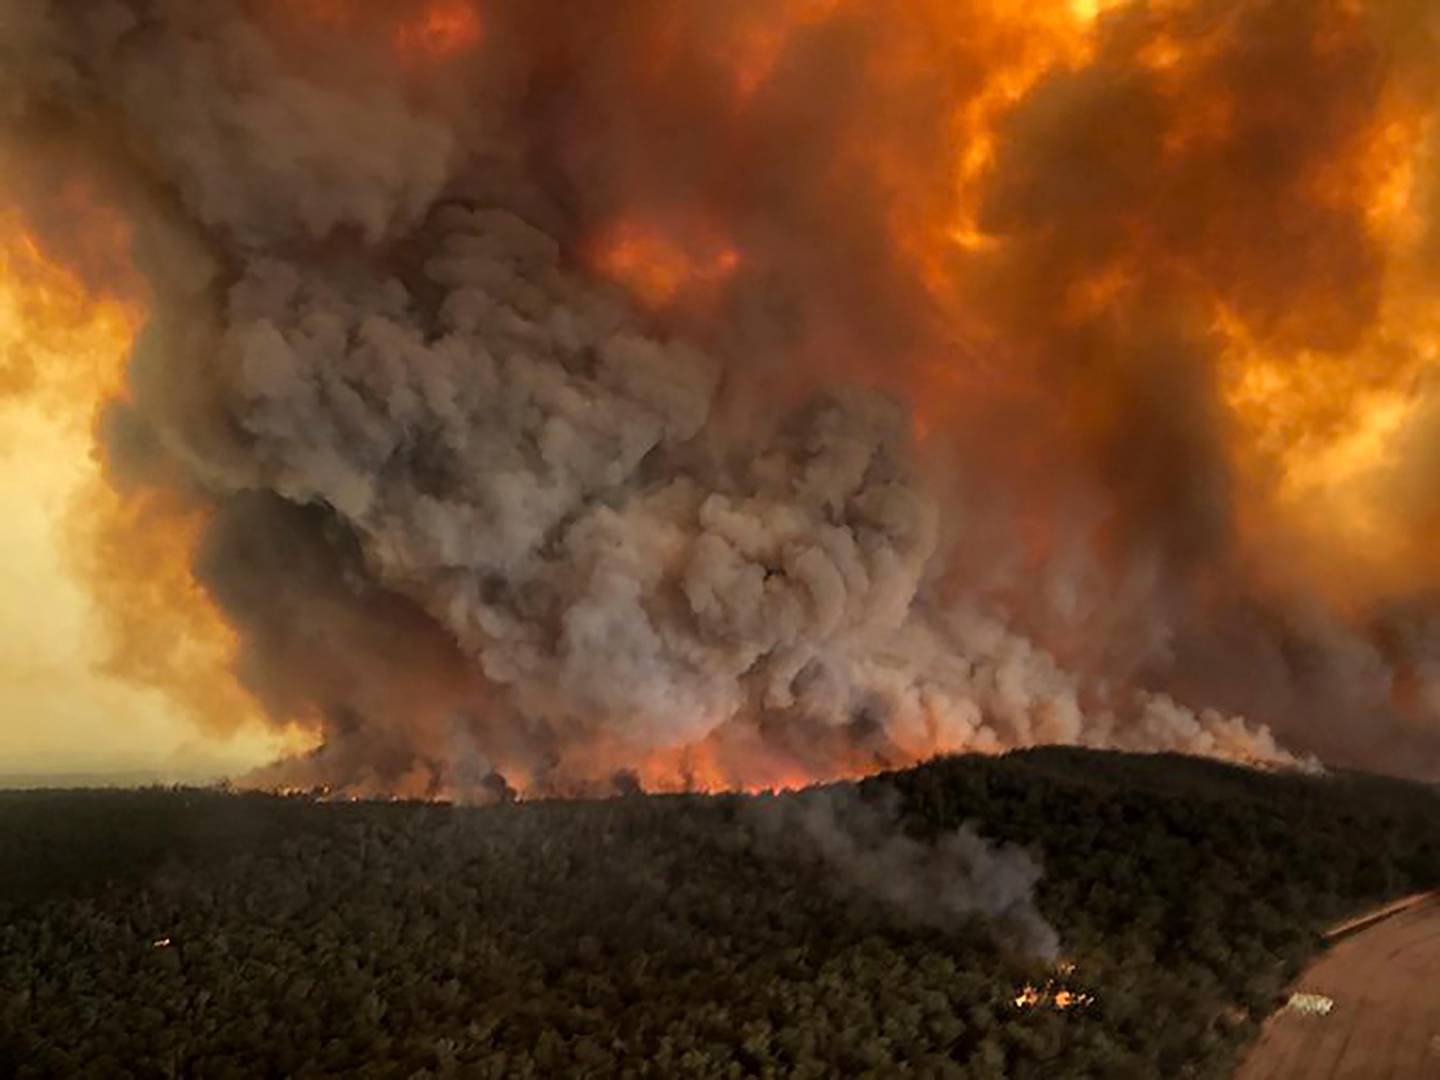 FILE - In this Monday, Dec. 30, 2019, aerial file photo, wildfires rage under plumes of smoke in Bairnsdale, Australia. U.S. officials said Tuesday, Jan. 7, 2020 they planning to send at least 100 more firefighters to Australia to join 159 already there battling blazes that have killed multiple people and destroyed thousands of homes. (Glen Morey via AP, File)